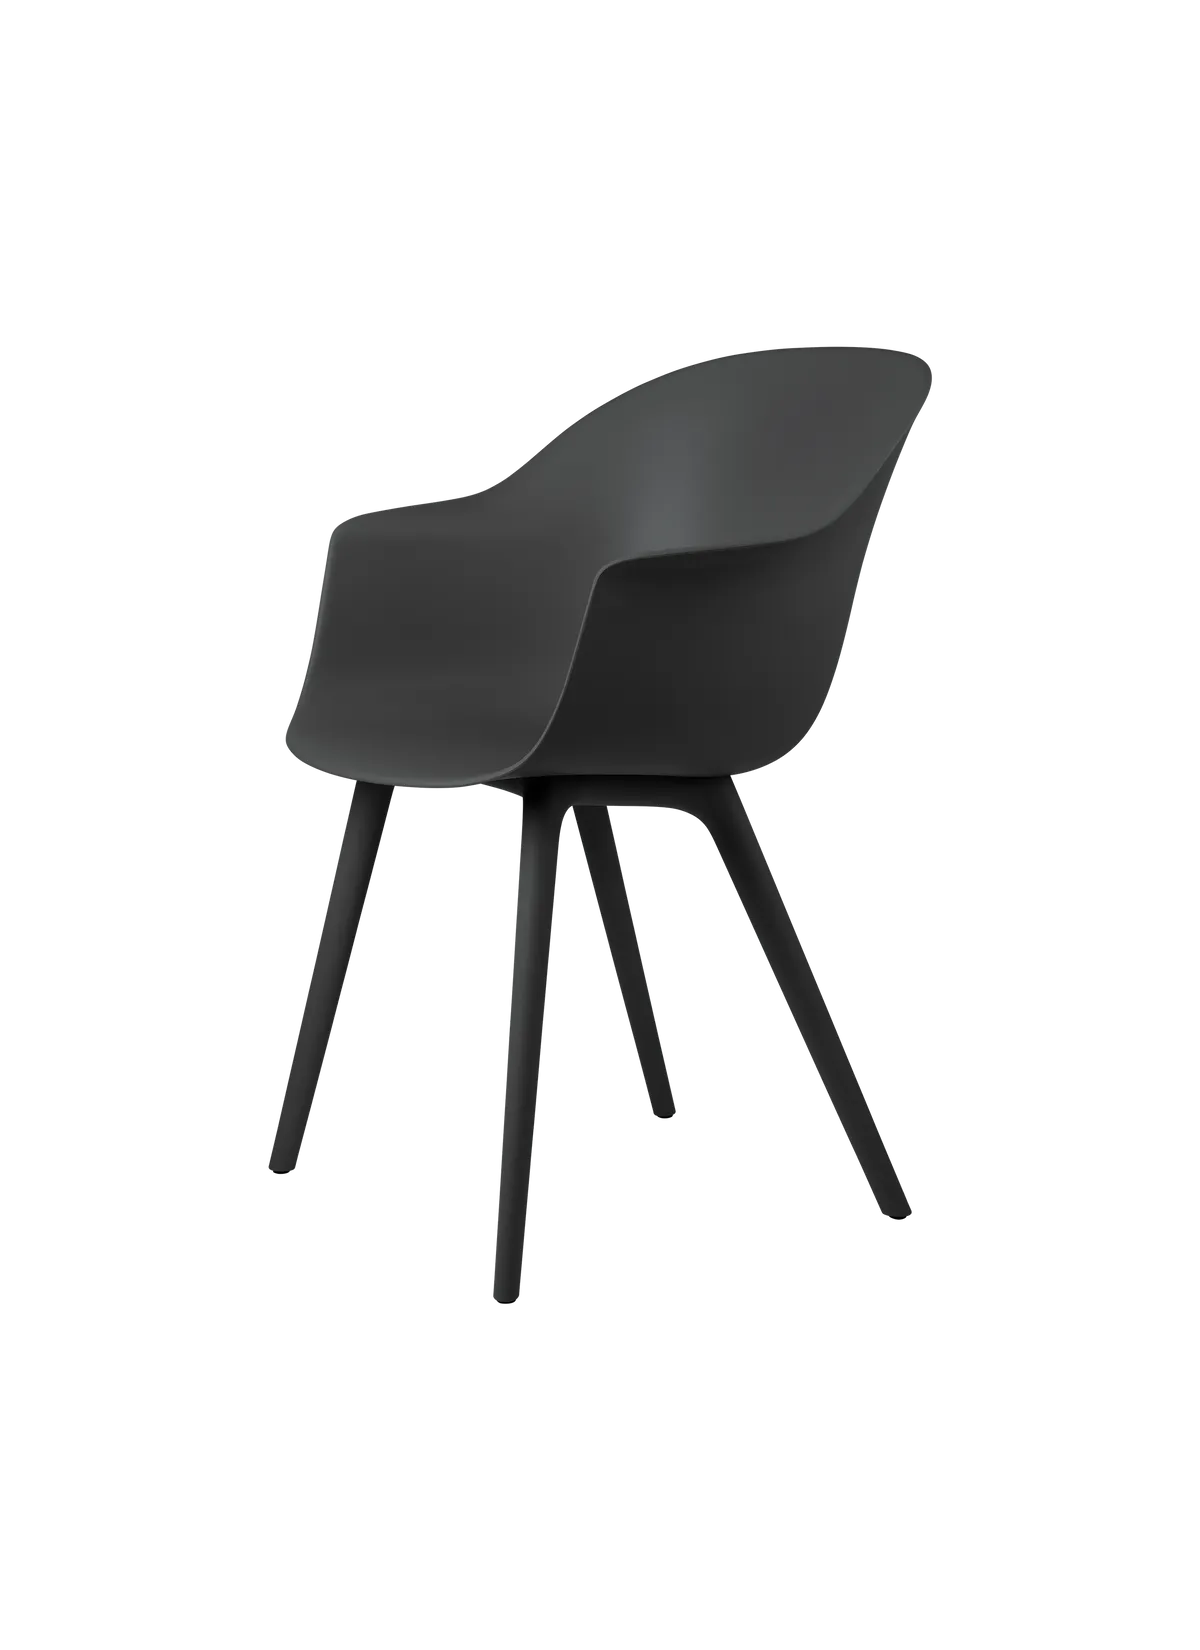 Bat Dining Chair - Un-Upholstered - Plastic Base by Gubi